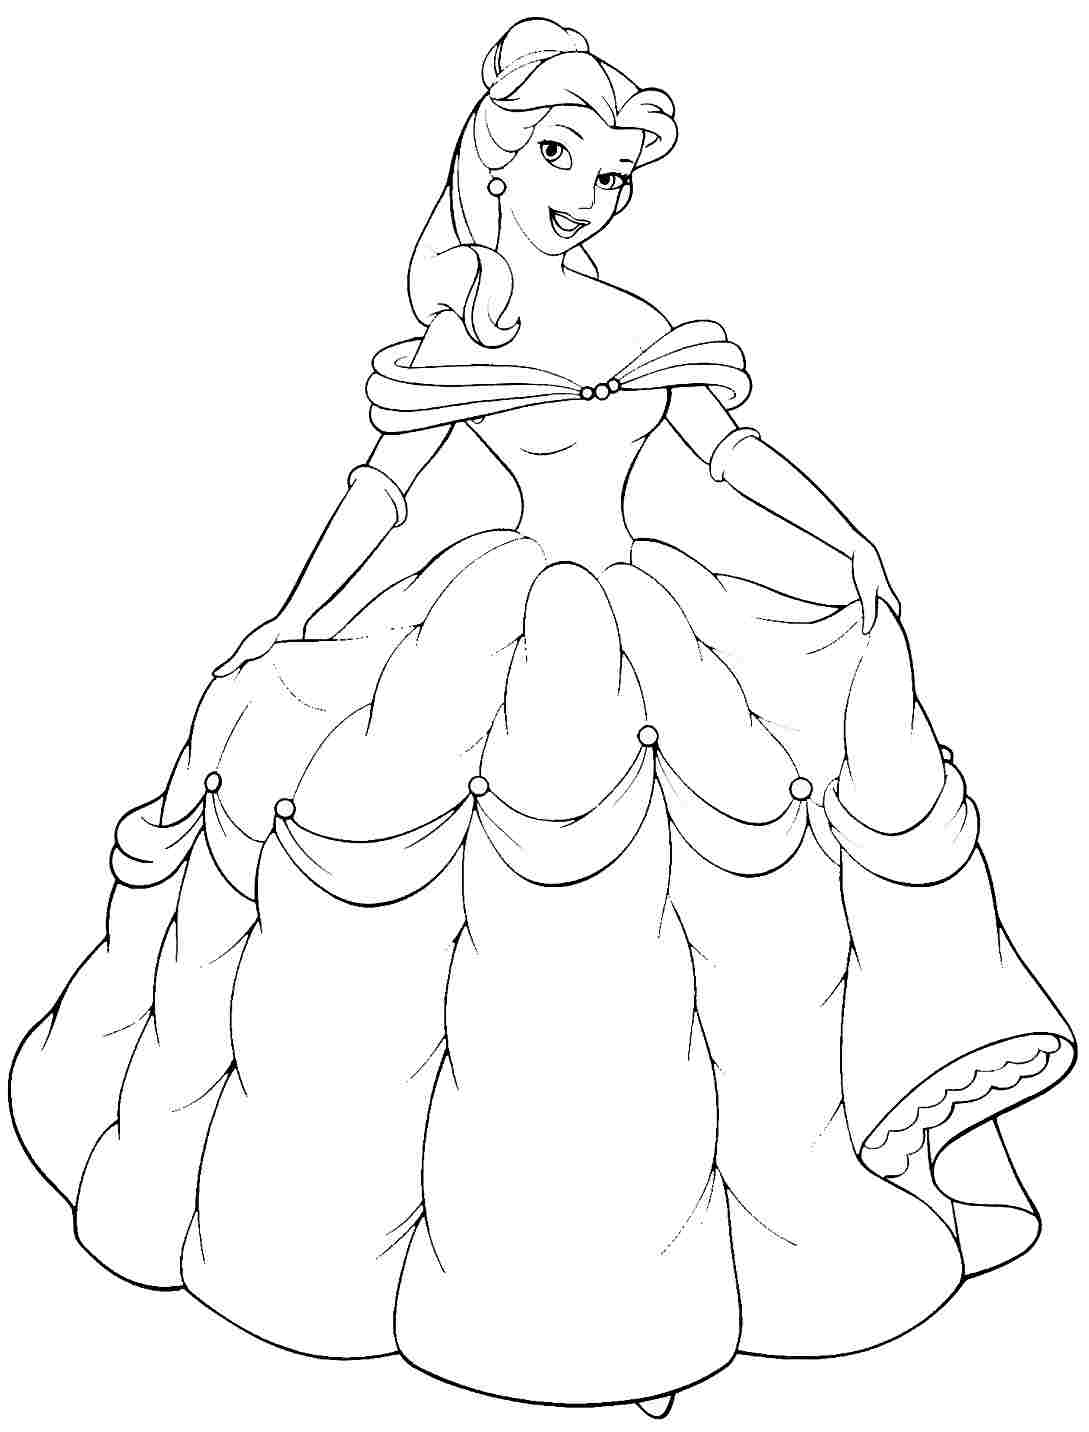 Princess Belle Coloring Pages Hot Sale, 20 OFF   www ...